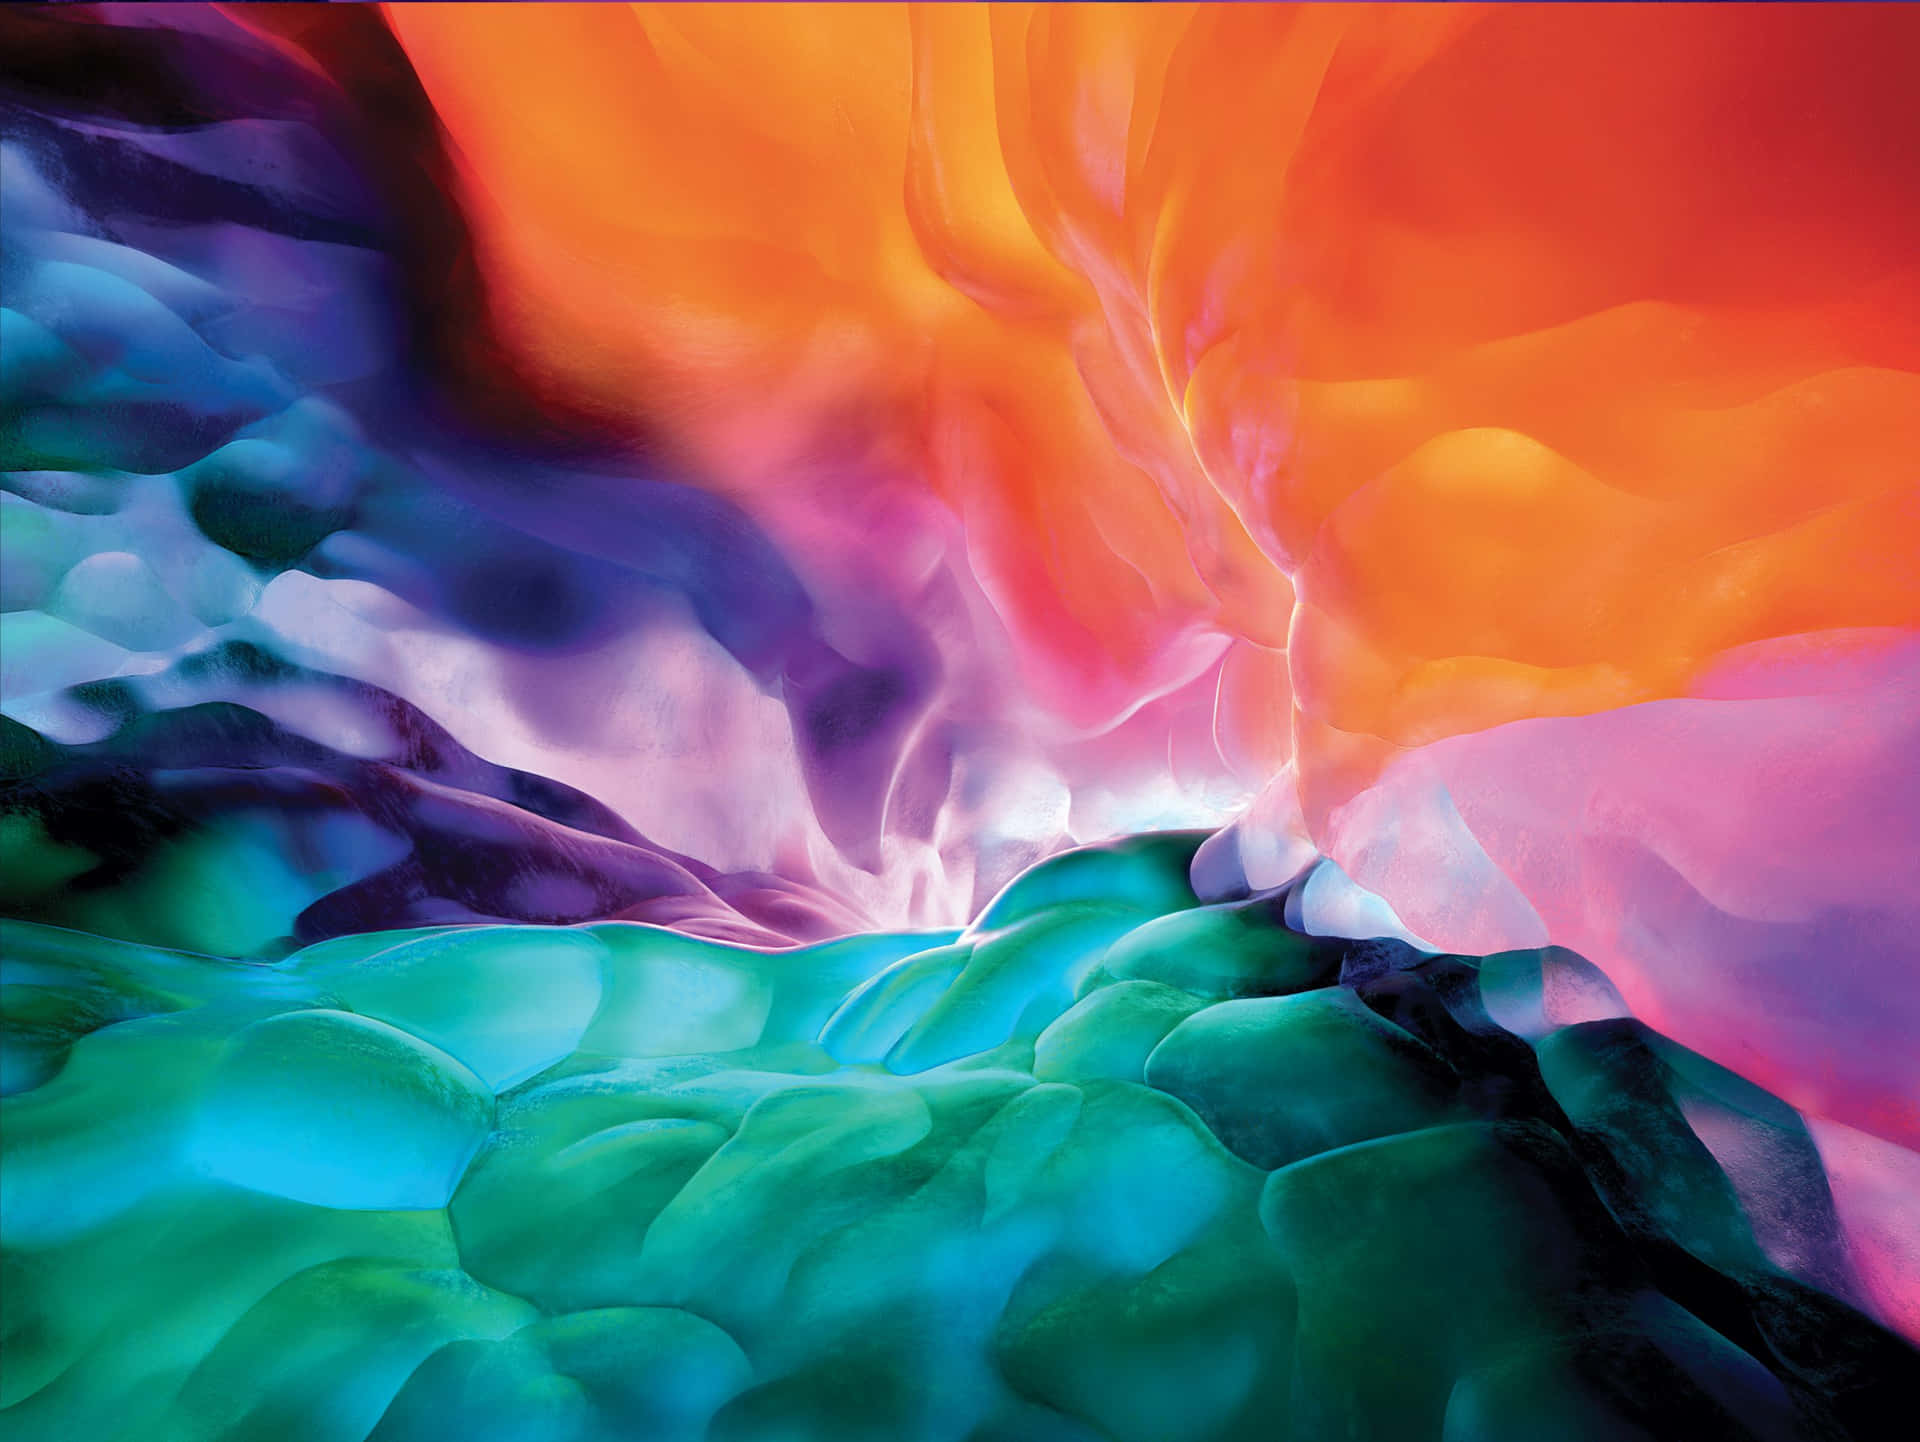 Get ready to experience immersive power with the new iPad Pro Wallpaper